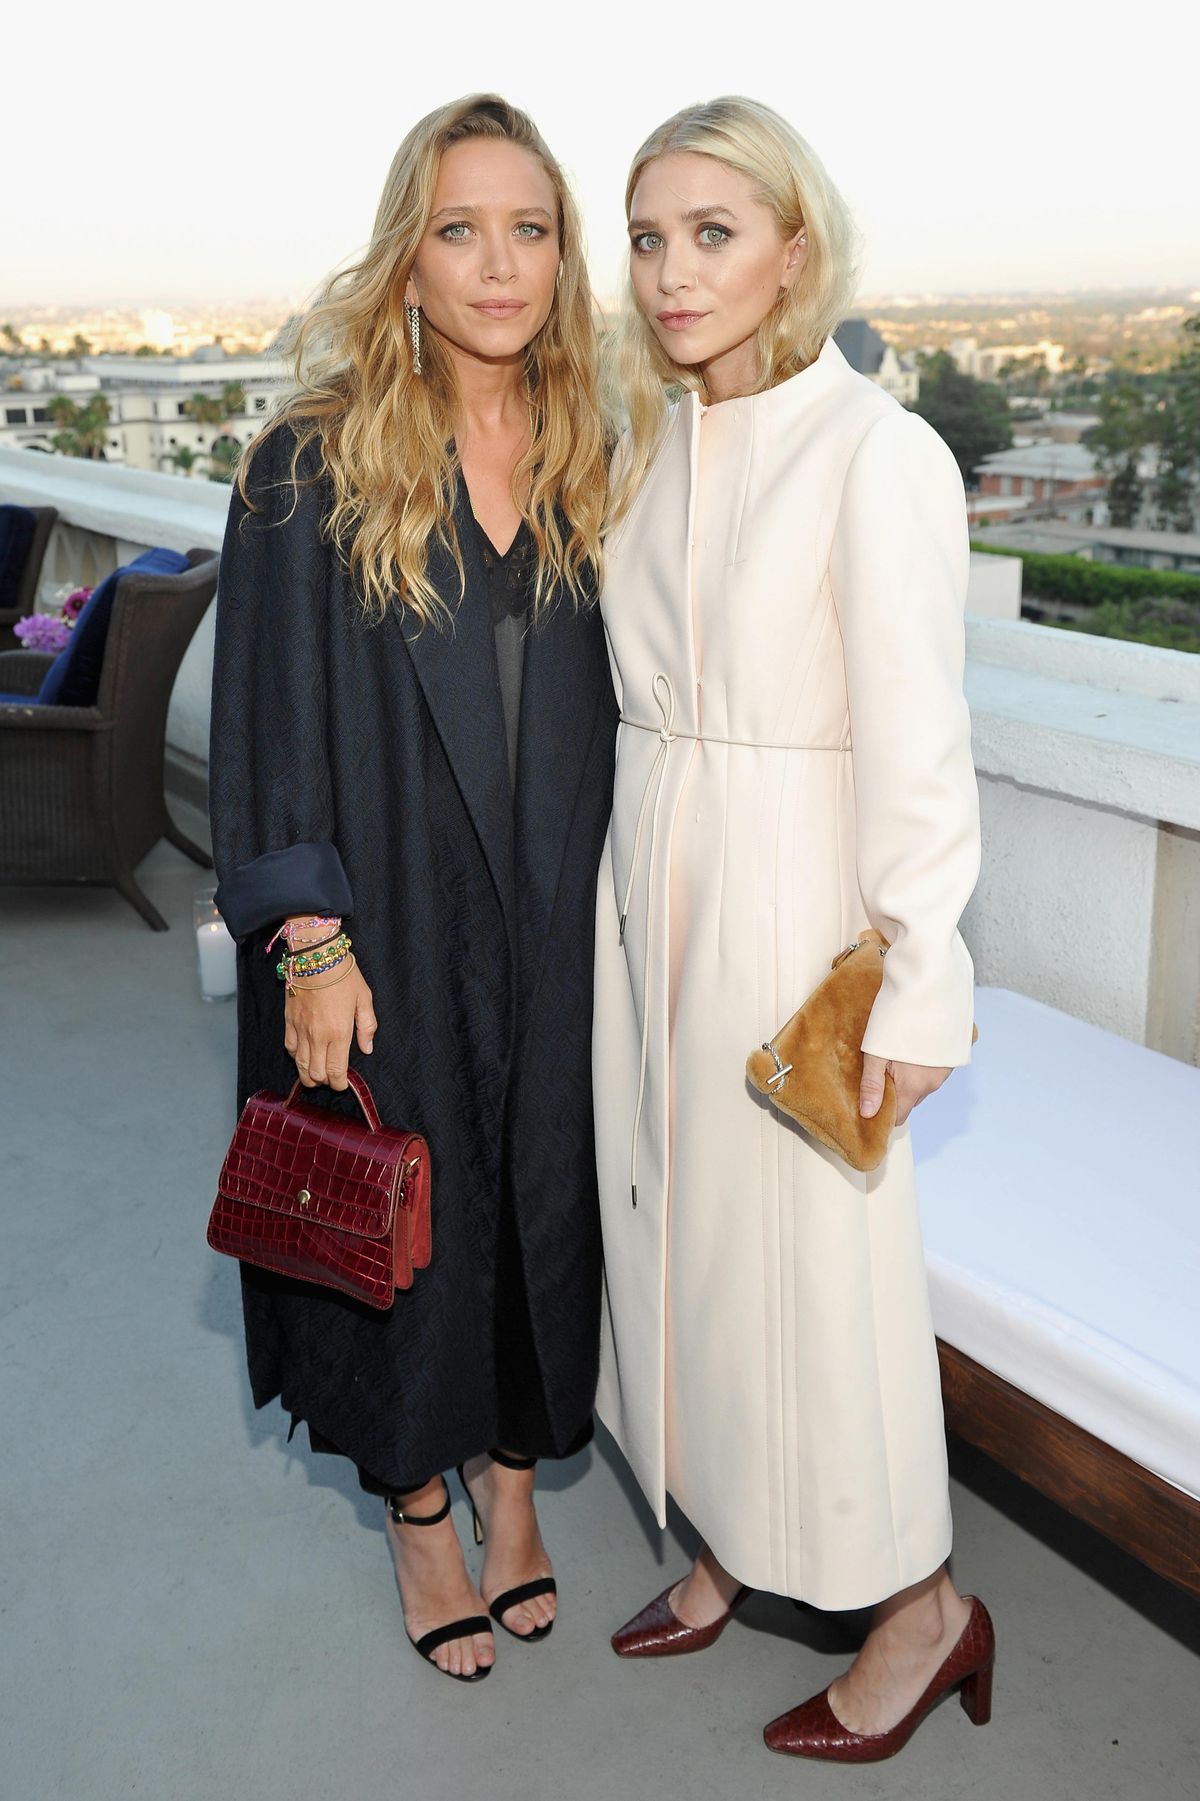 Mary-Kate Ashley Olsen Didn't Cast a Model of Color Their Latest Fashion Show